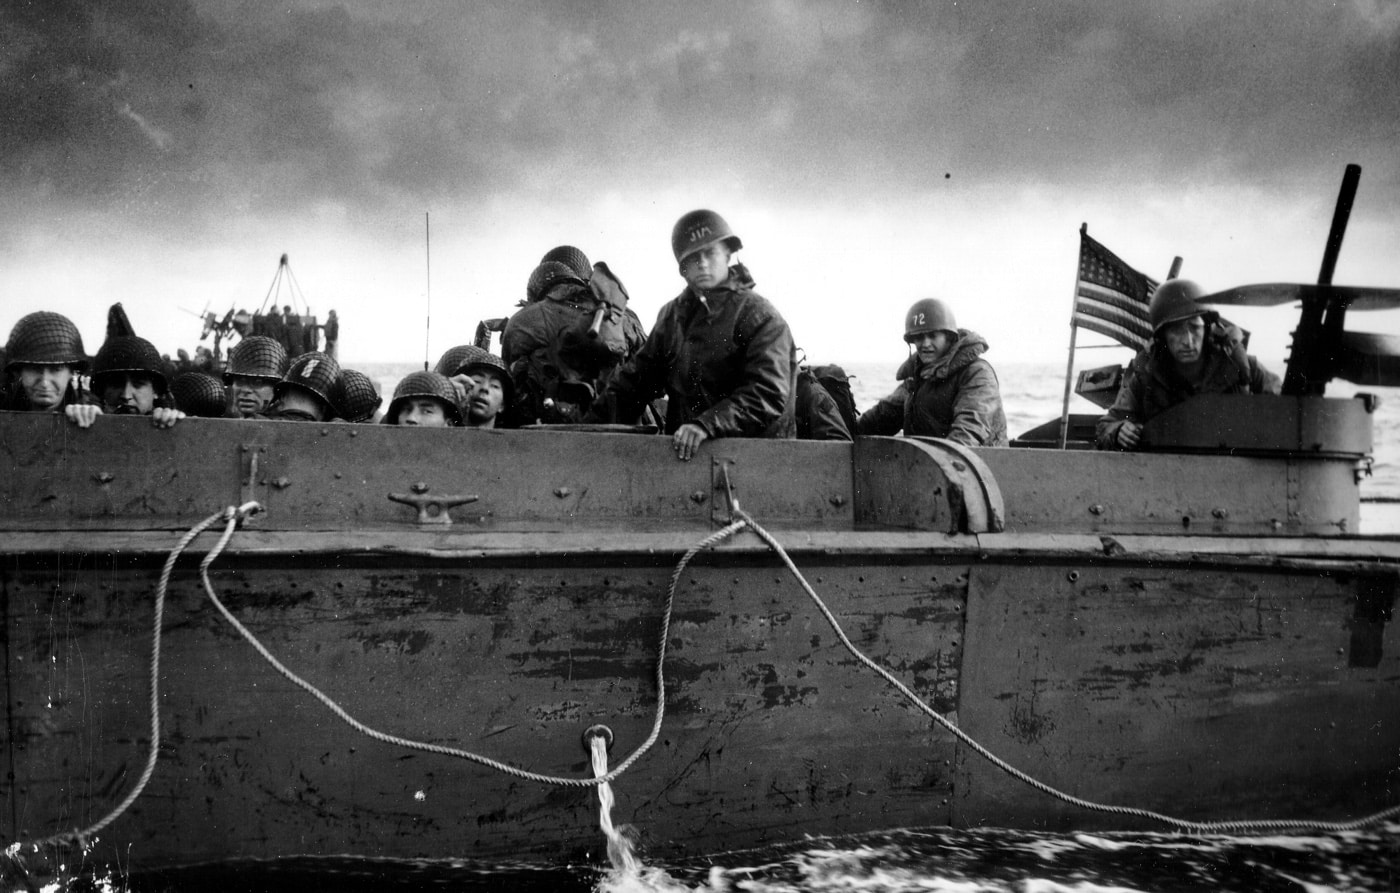 We see a Higgins Boat carrying American troops to Omaha Beach during Operation Neptune that broke Germany's Atlantic Wall.